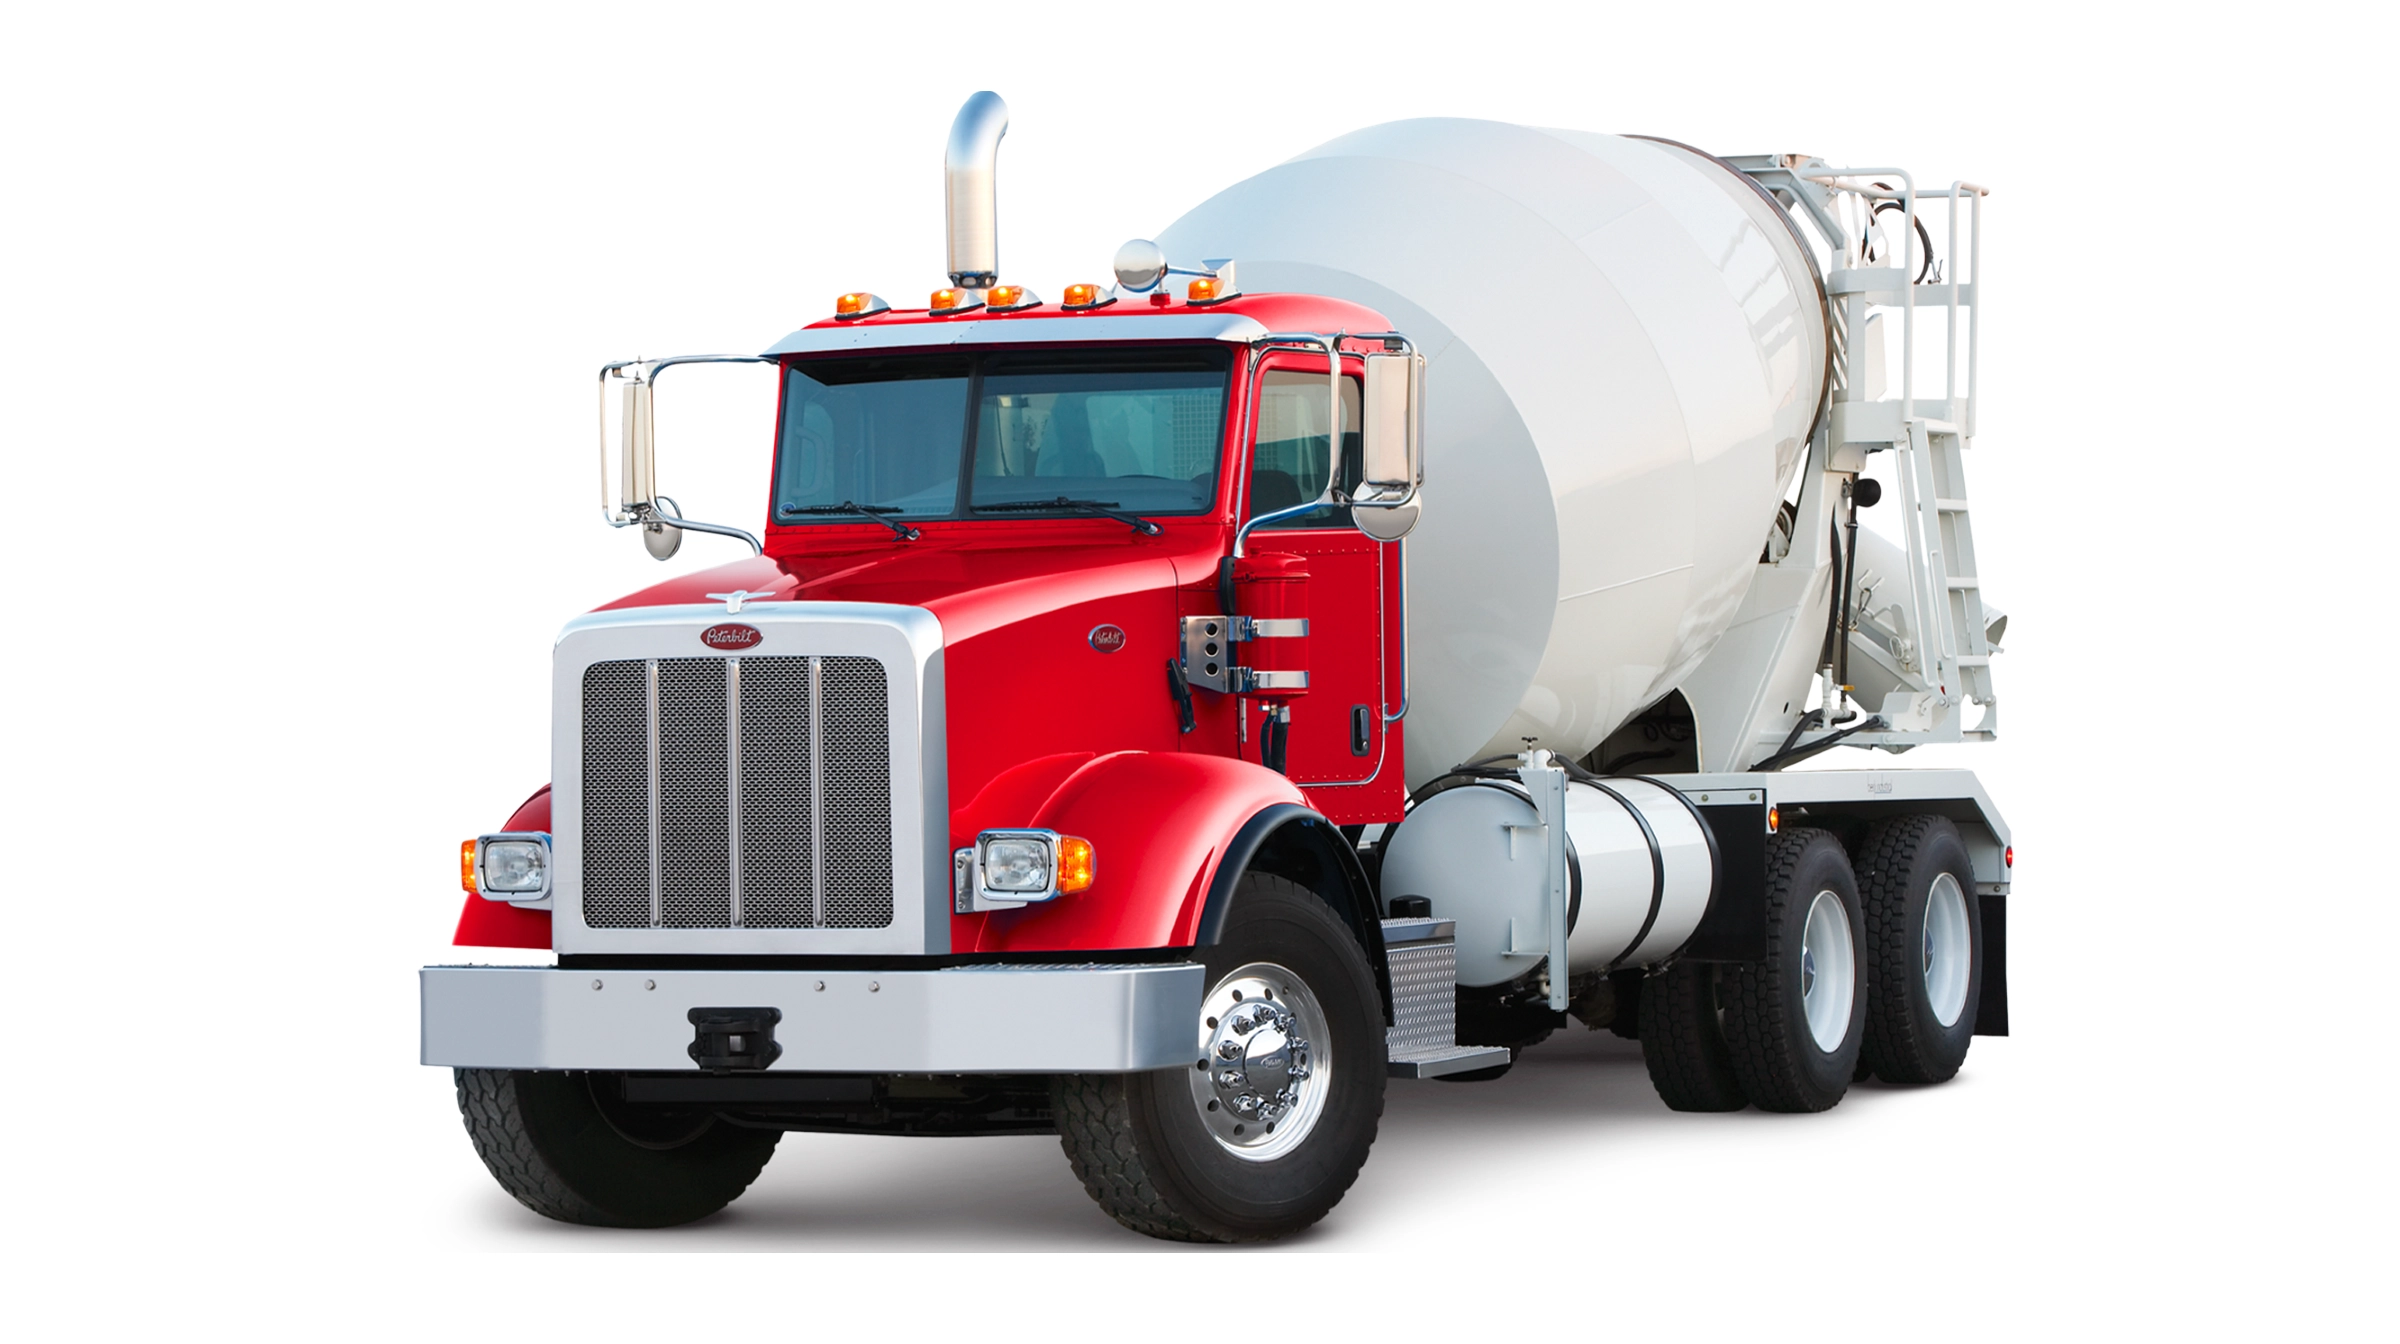 Peterbilt Model 365 Vocational Red Truck with White Concrete Mixer Body Isolated - Feature Image